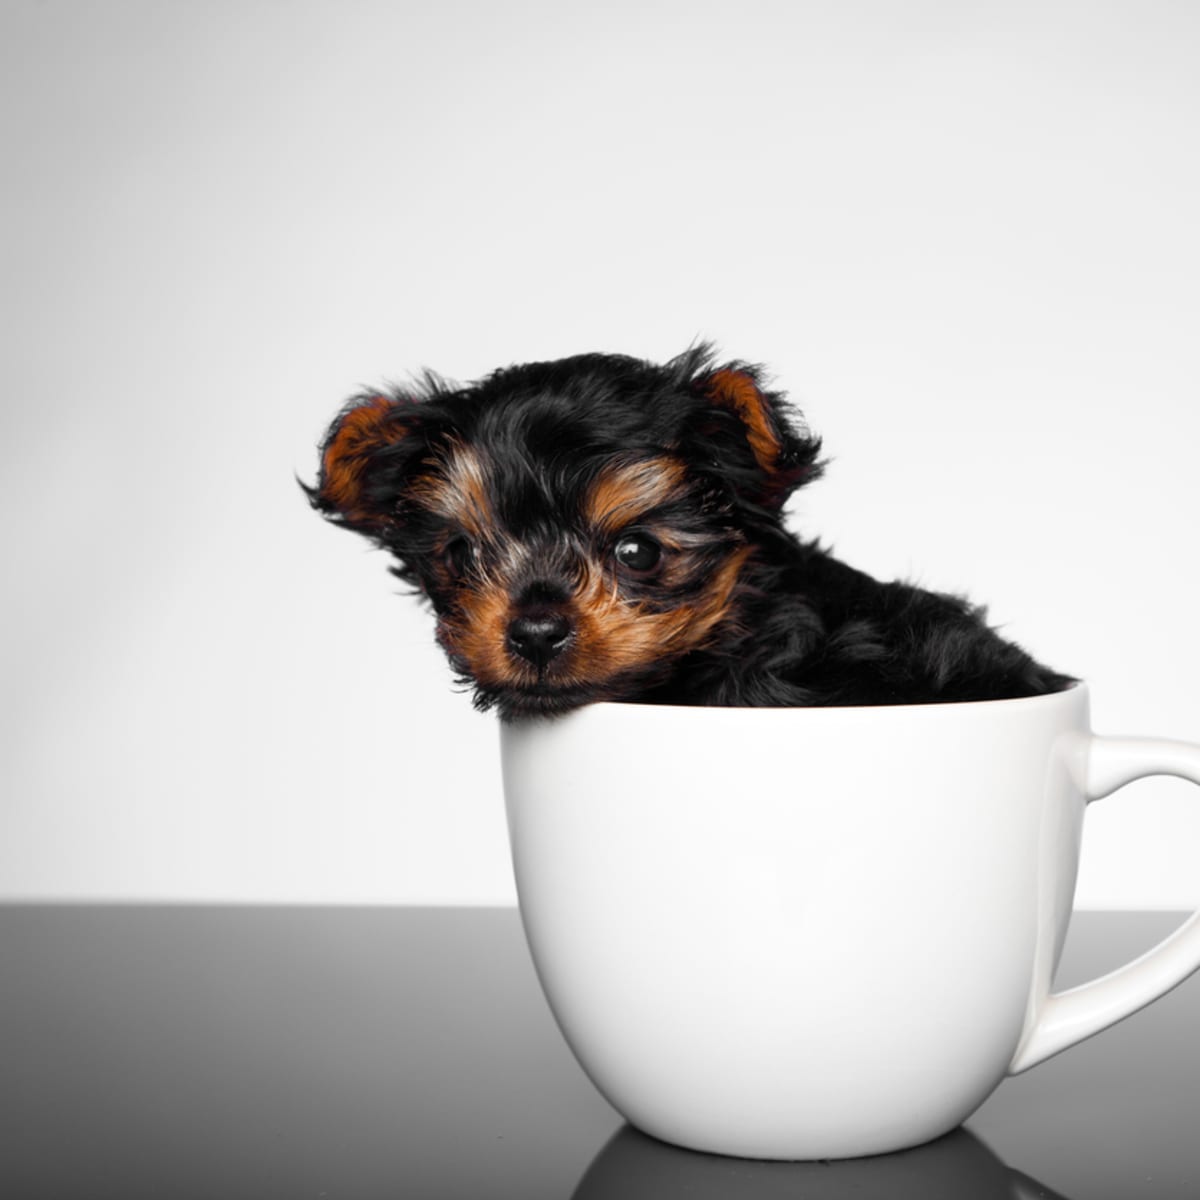 how much are micro minature teacup poodles